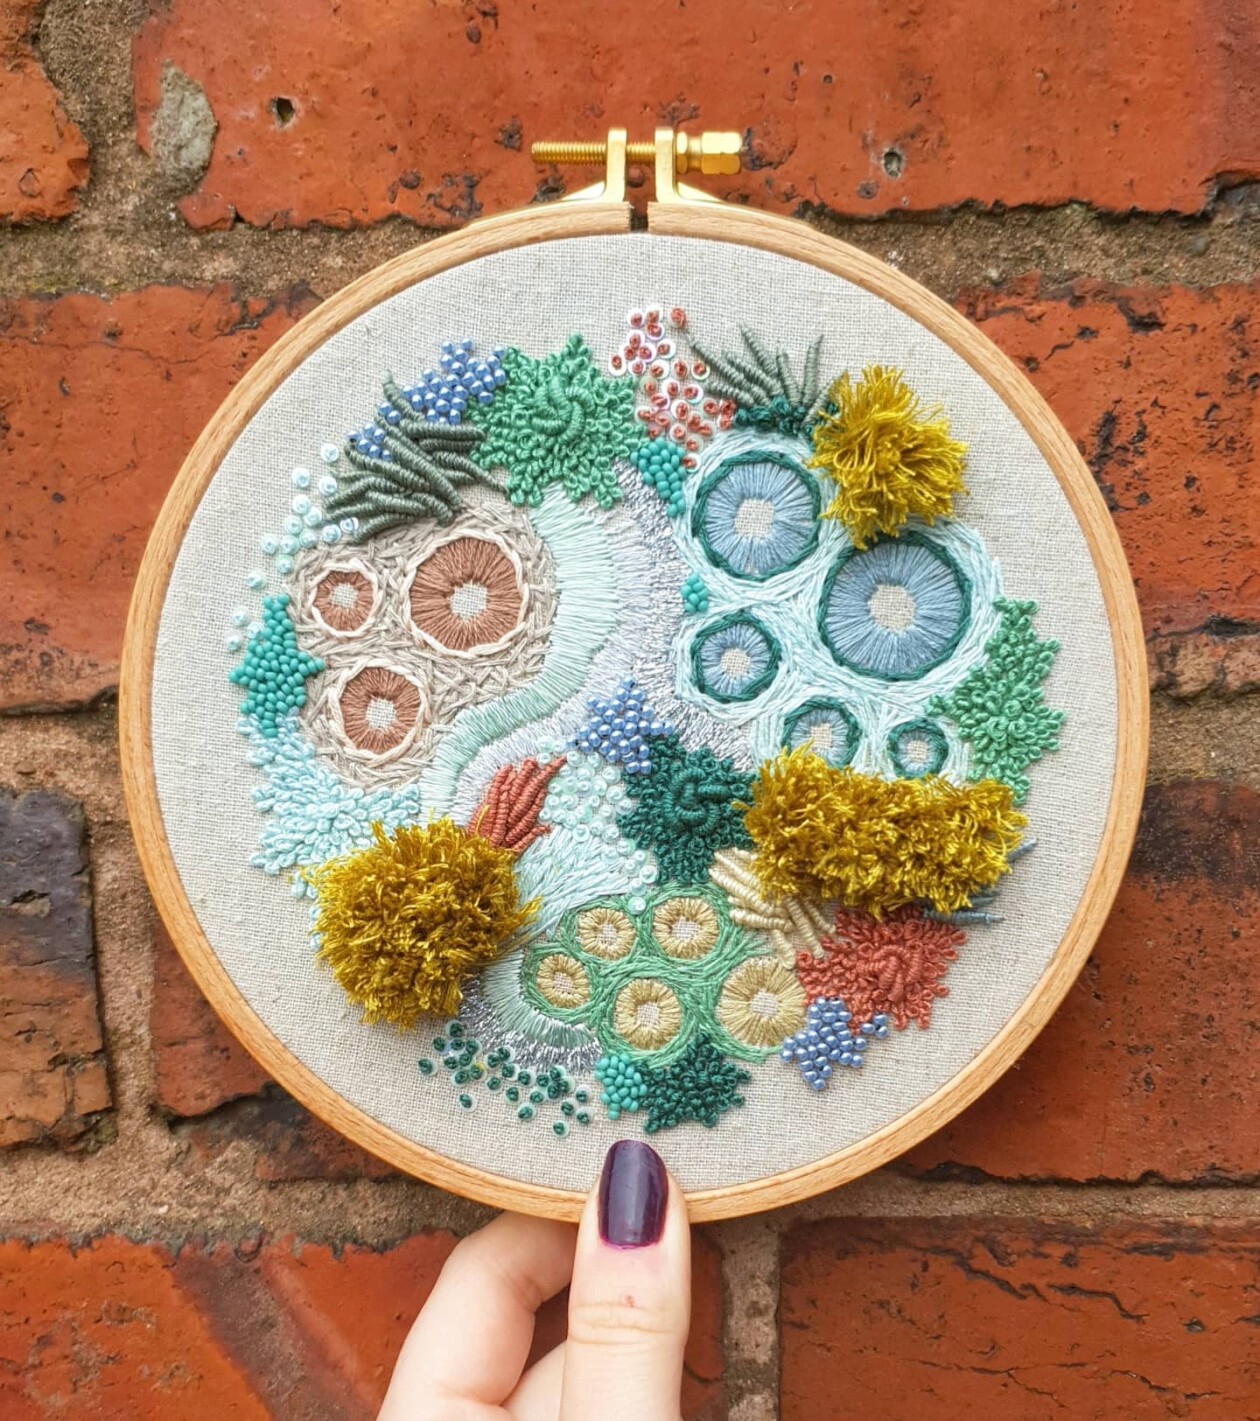 Marvelous Embroideries Inspired By Moss, Coral, And Lichen Forms By Hannah Kwasnycia (7)